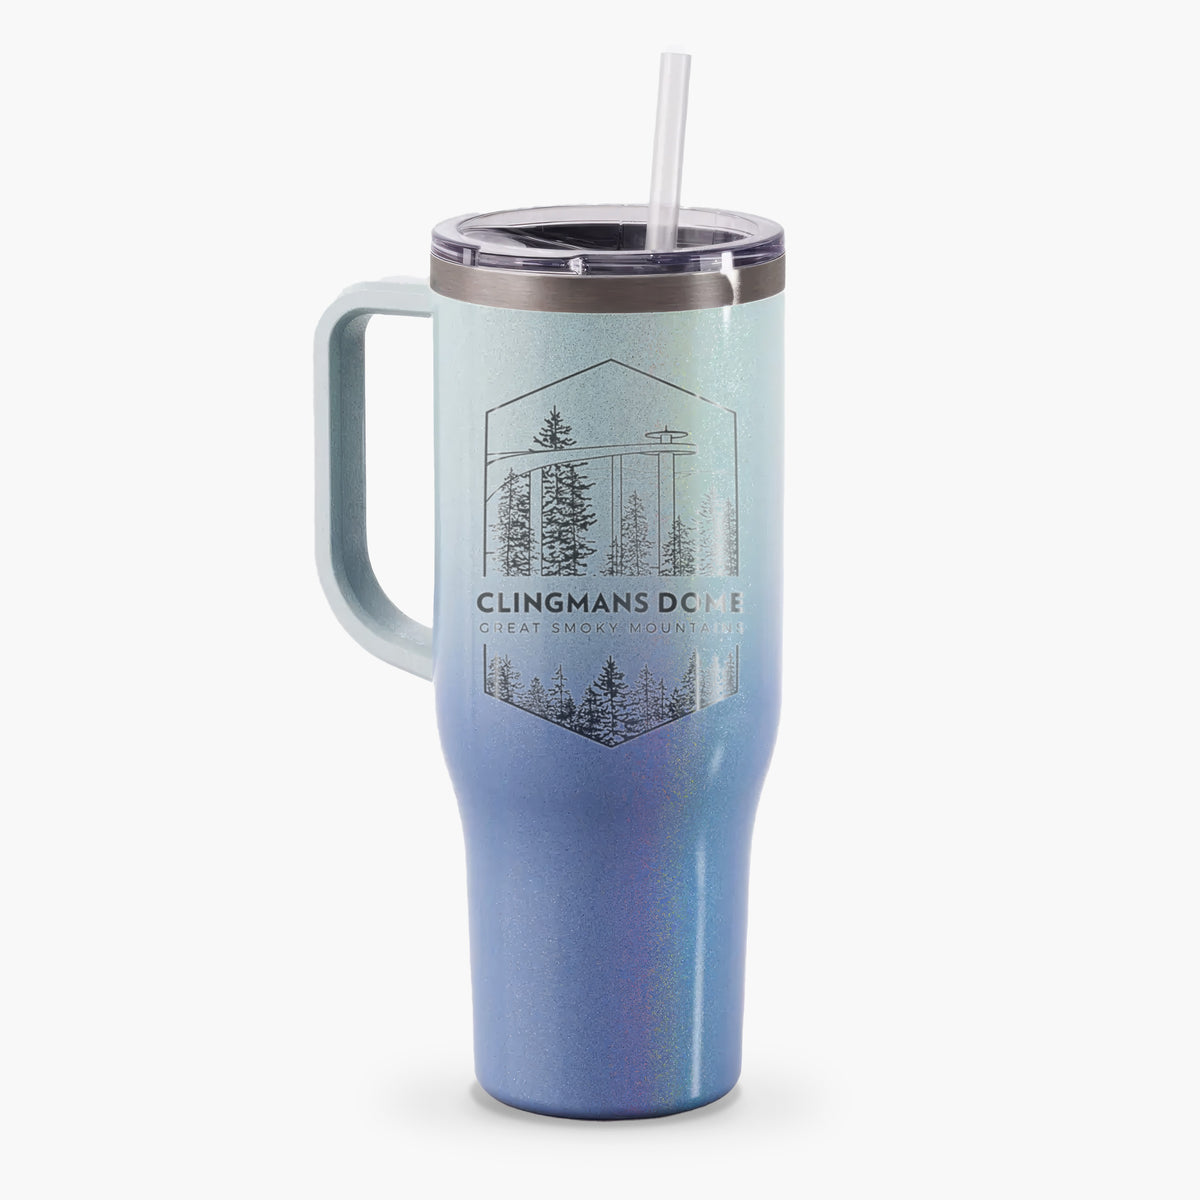 Clingmans Dome - Great Smoky Mountains National Park - 40oz Tumbler with Handle